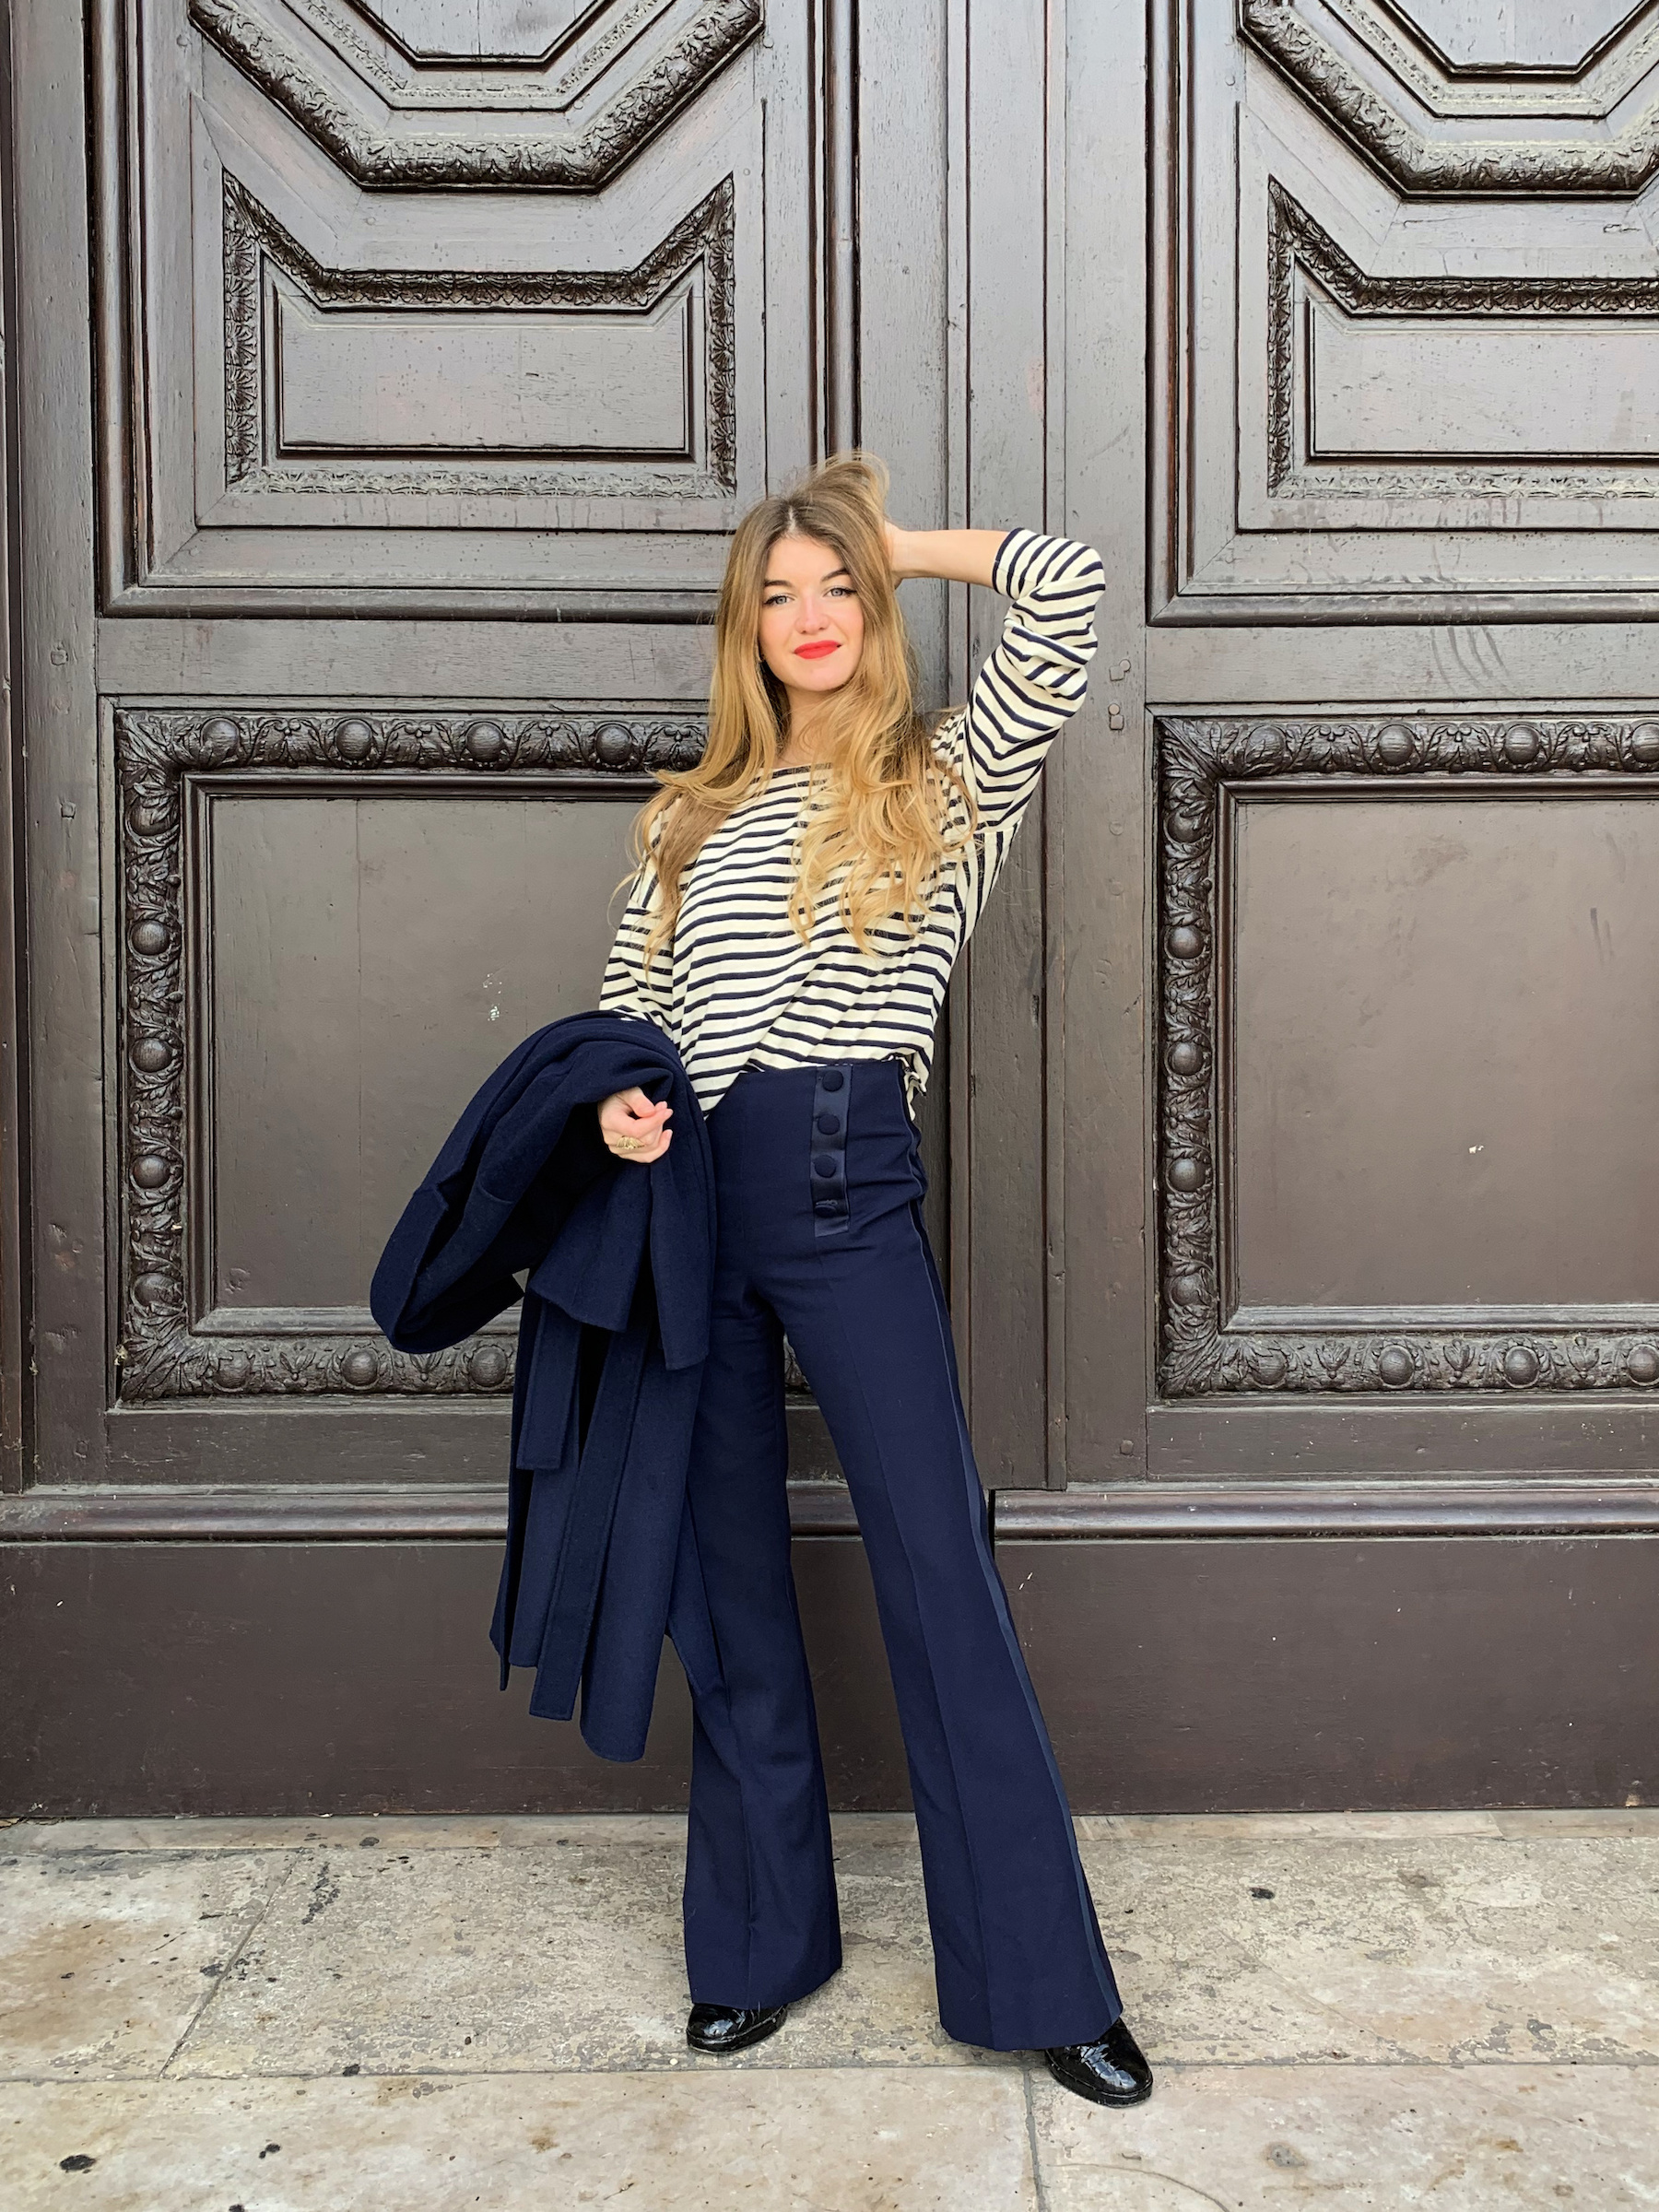 Constance Arnoult wearing high waisted navy pants in Paris